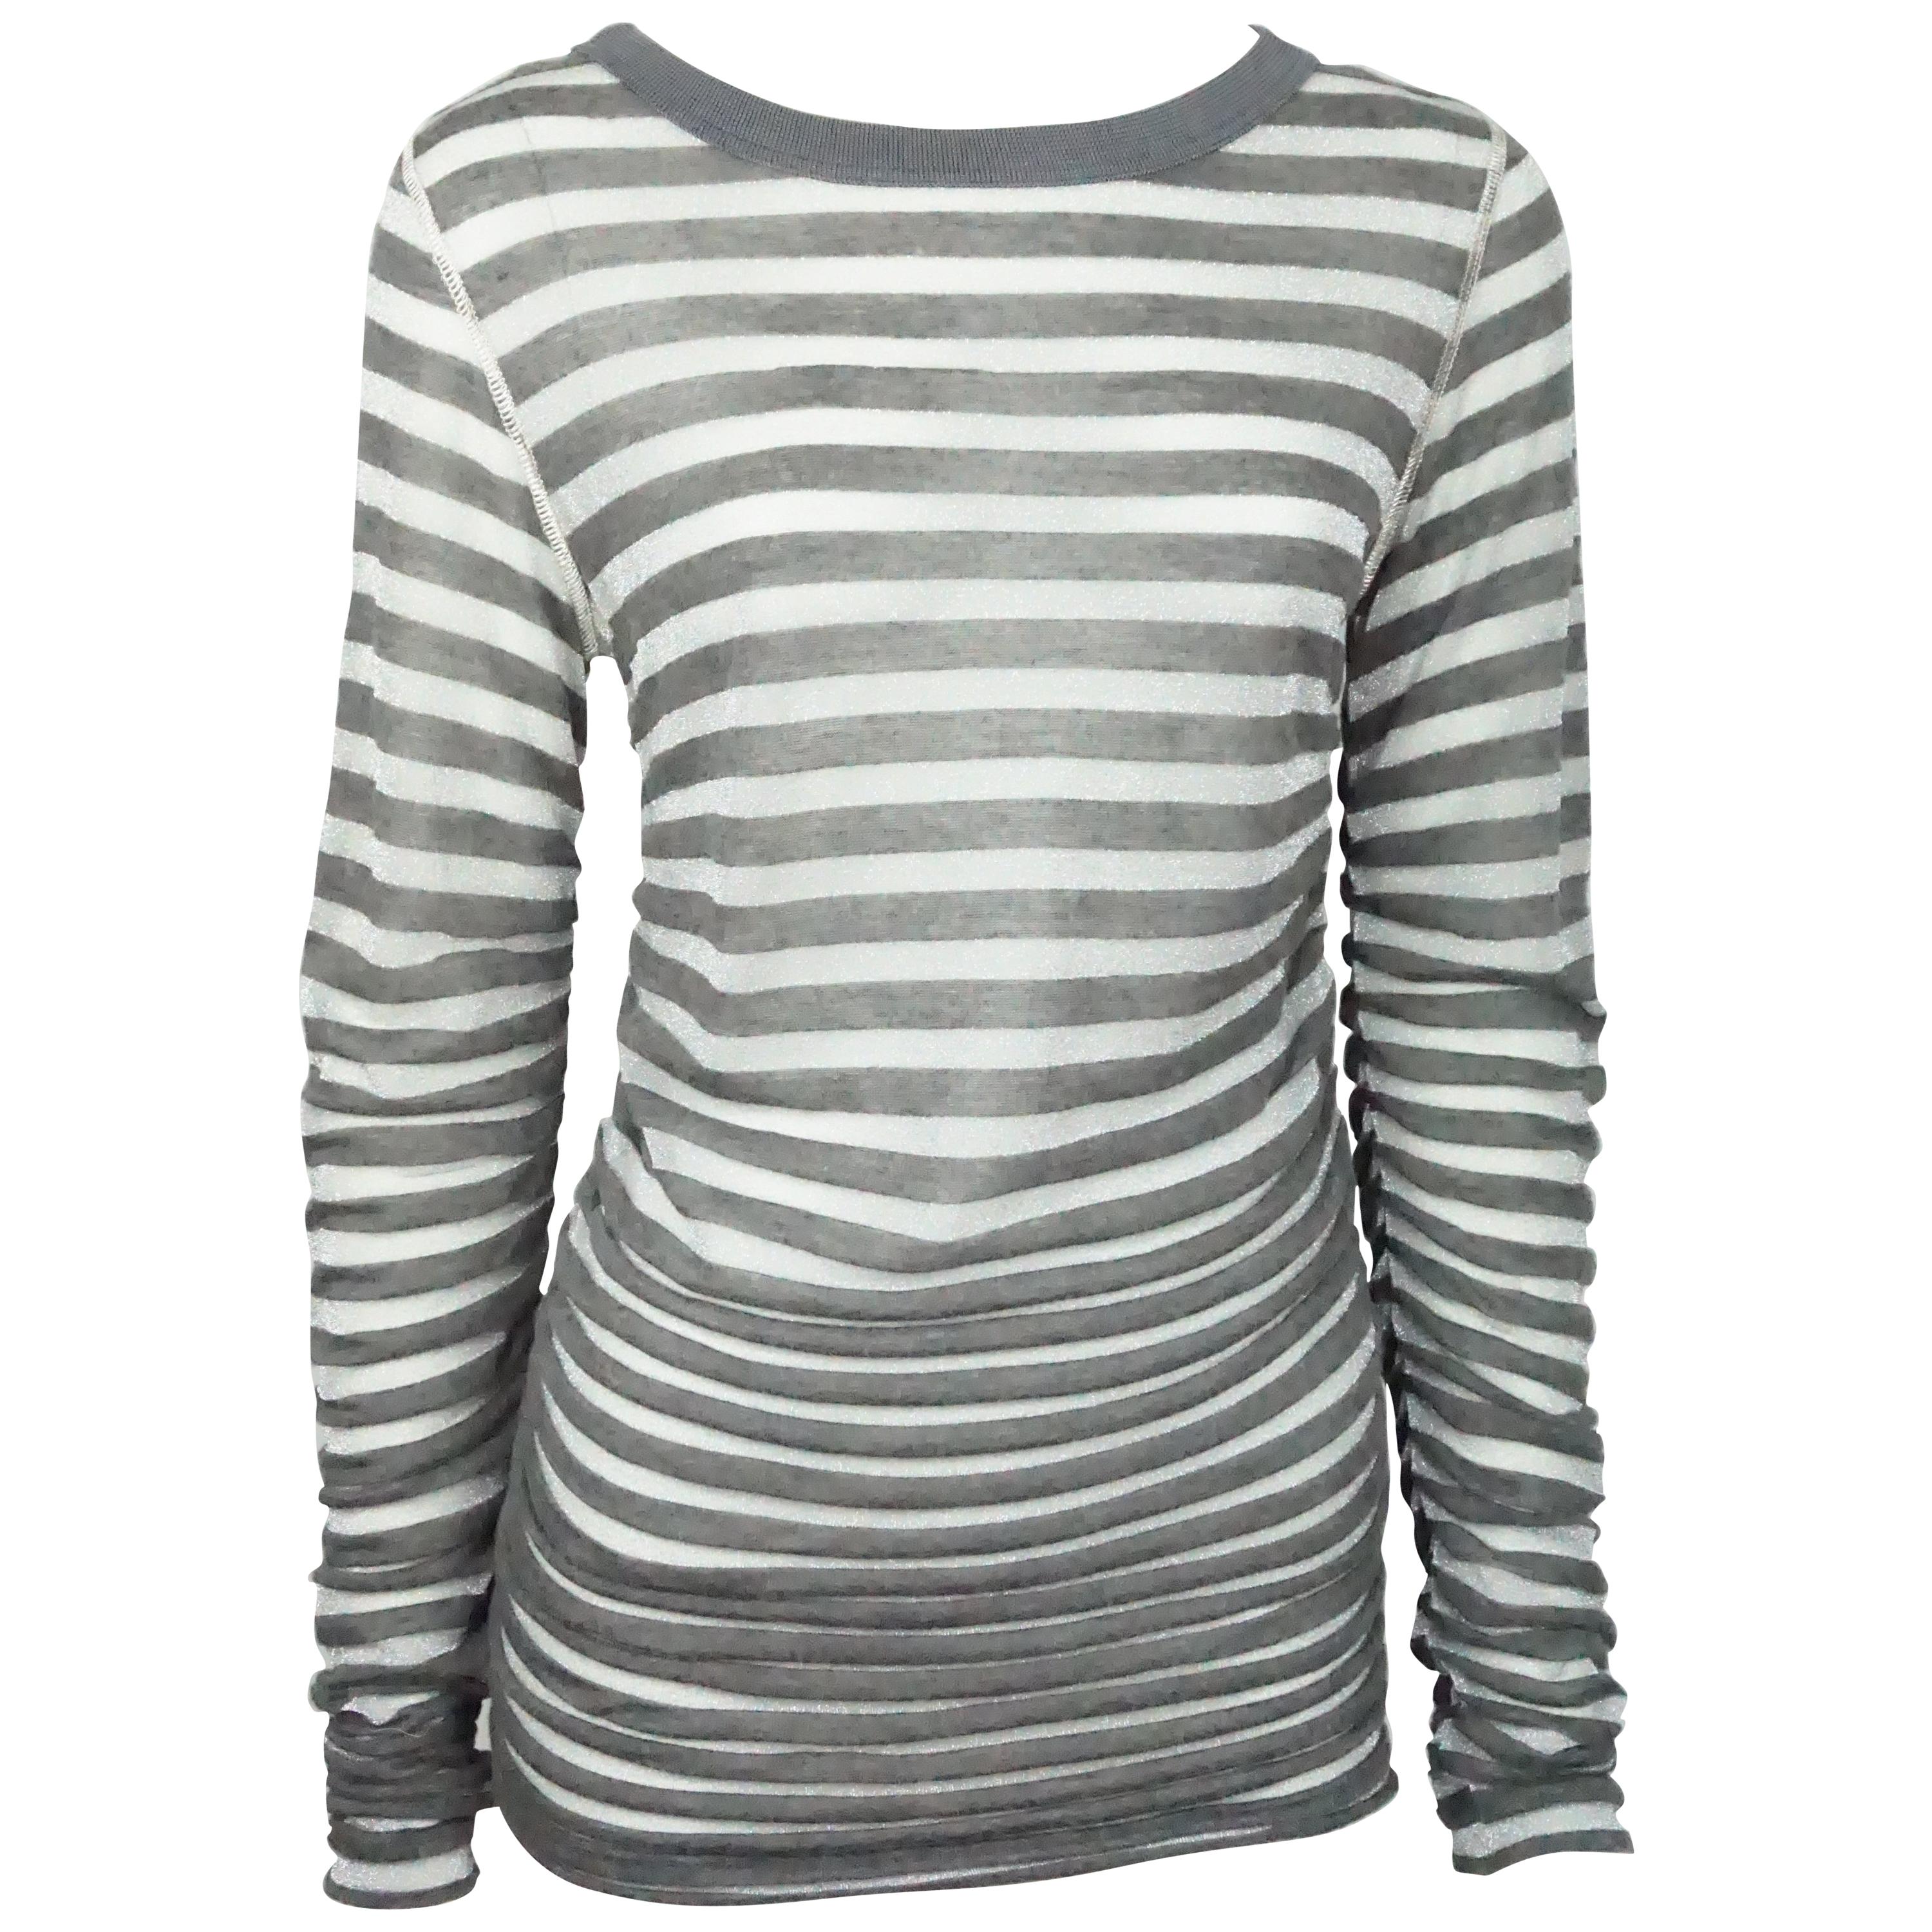 Dolce & Gabbana Charcoal and Silver Striped Long Sleeve Top 